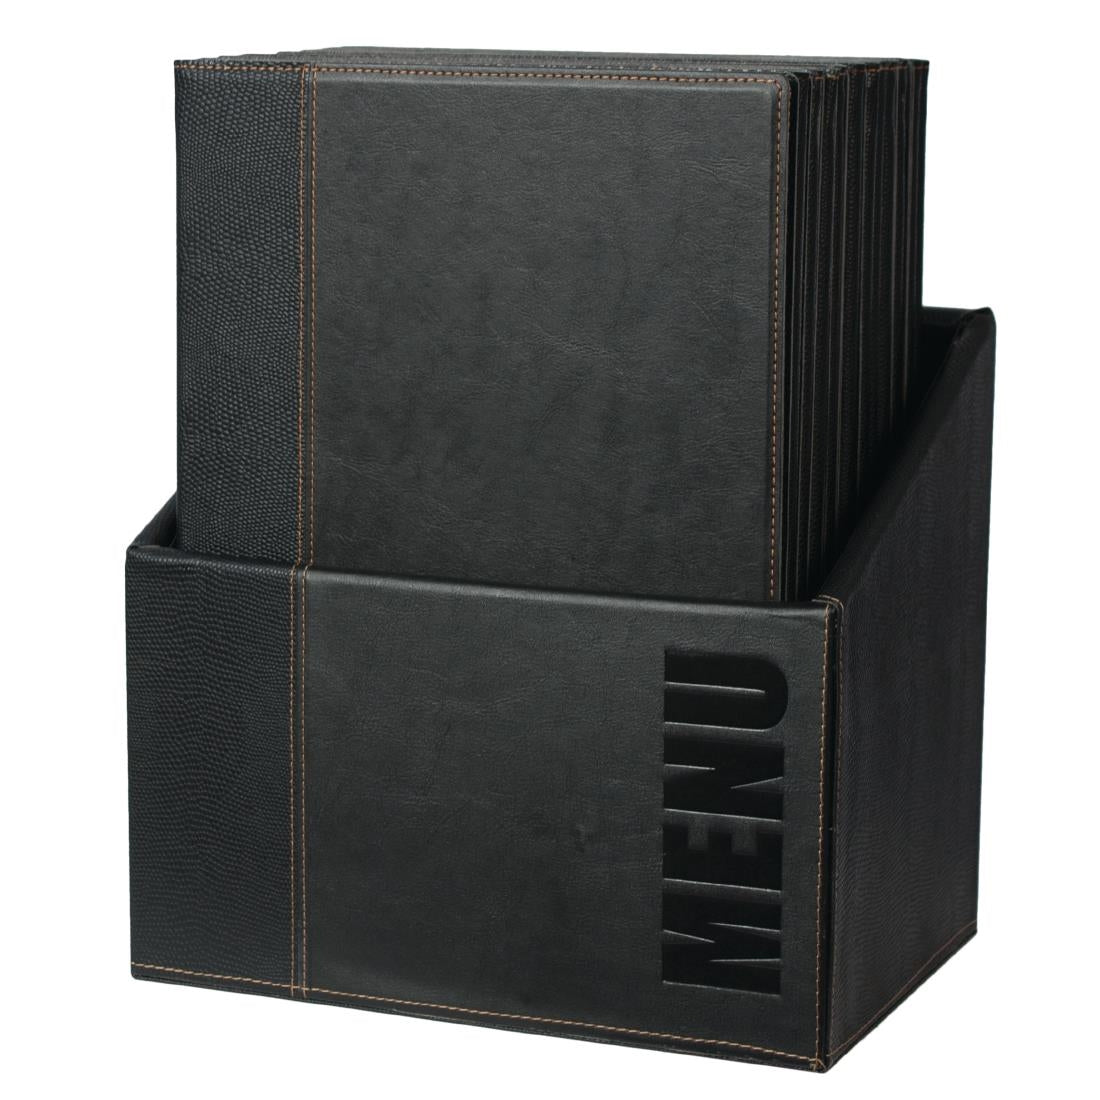 U266 Securit Contemporary Menu Covers and Storage Box A4 (Pack of 20)